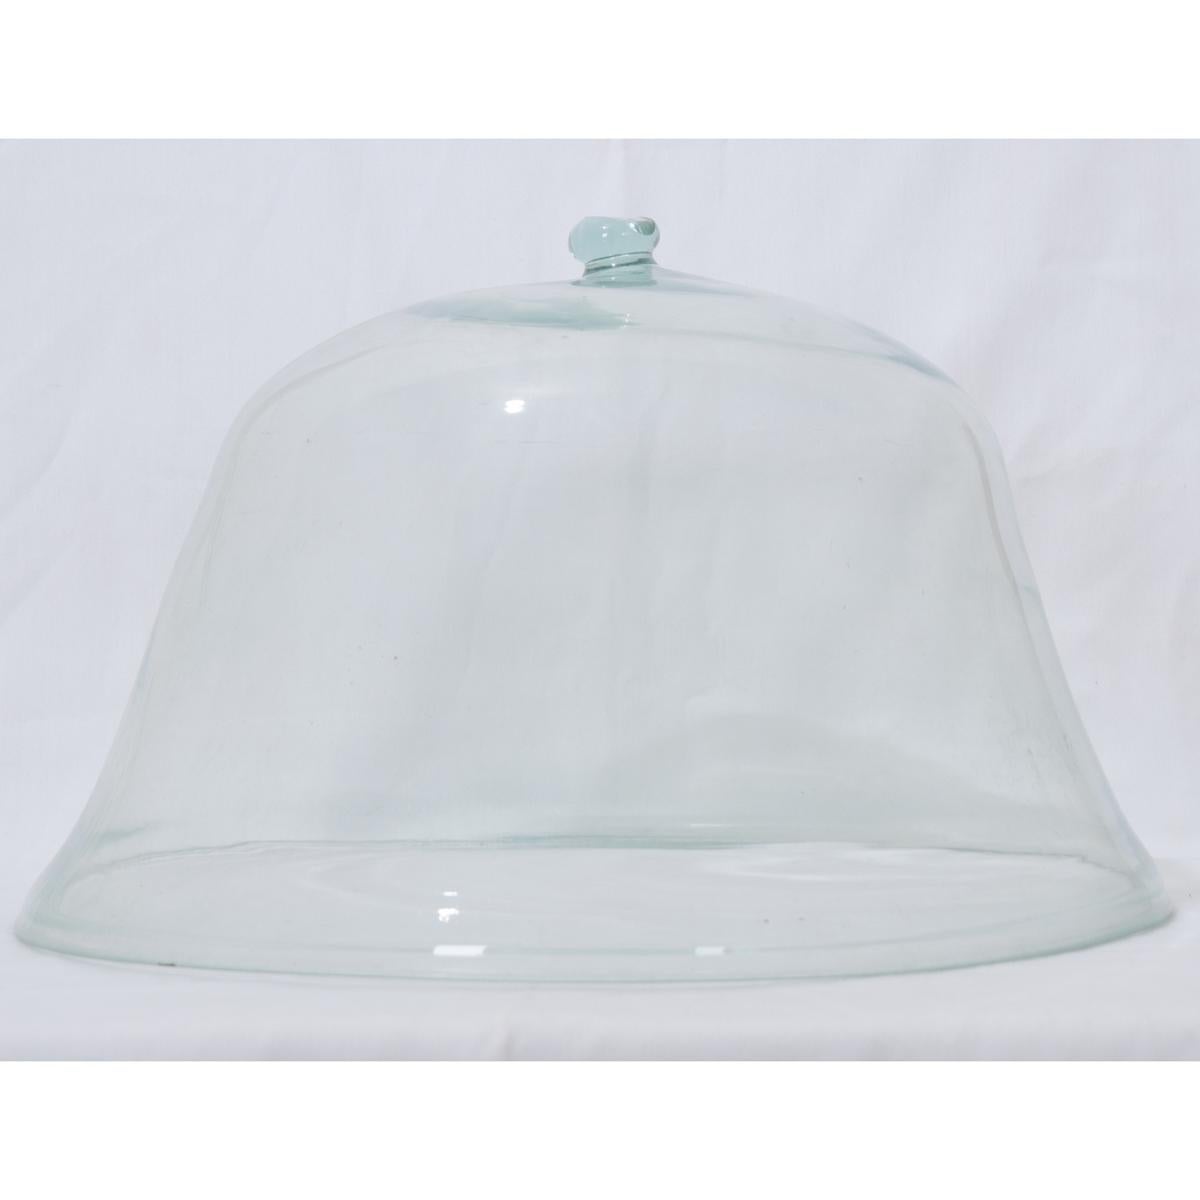 Large, blown-glass melon garden cloche. Formed as a single piece of clear glass with a solid knob handle. This one has a unique and irregular form, with flaws and imperfections that add to its organic characteristics. The solid glass knob has been